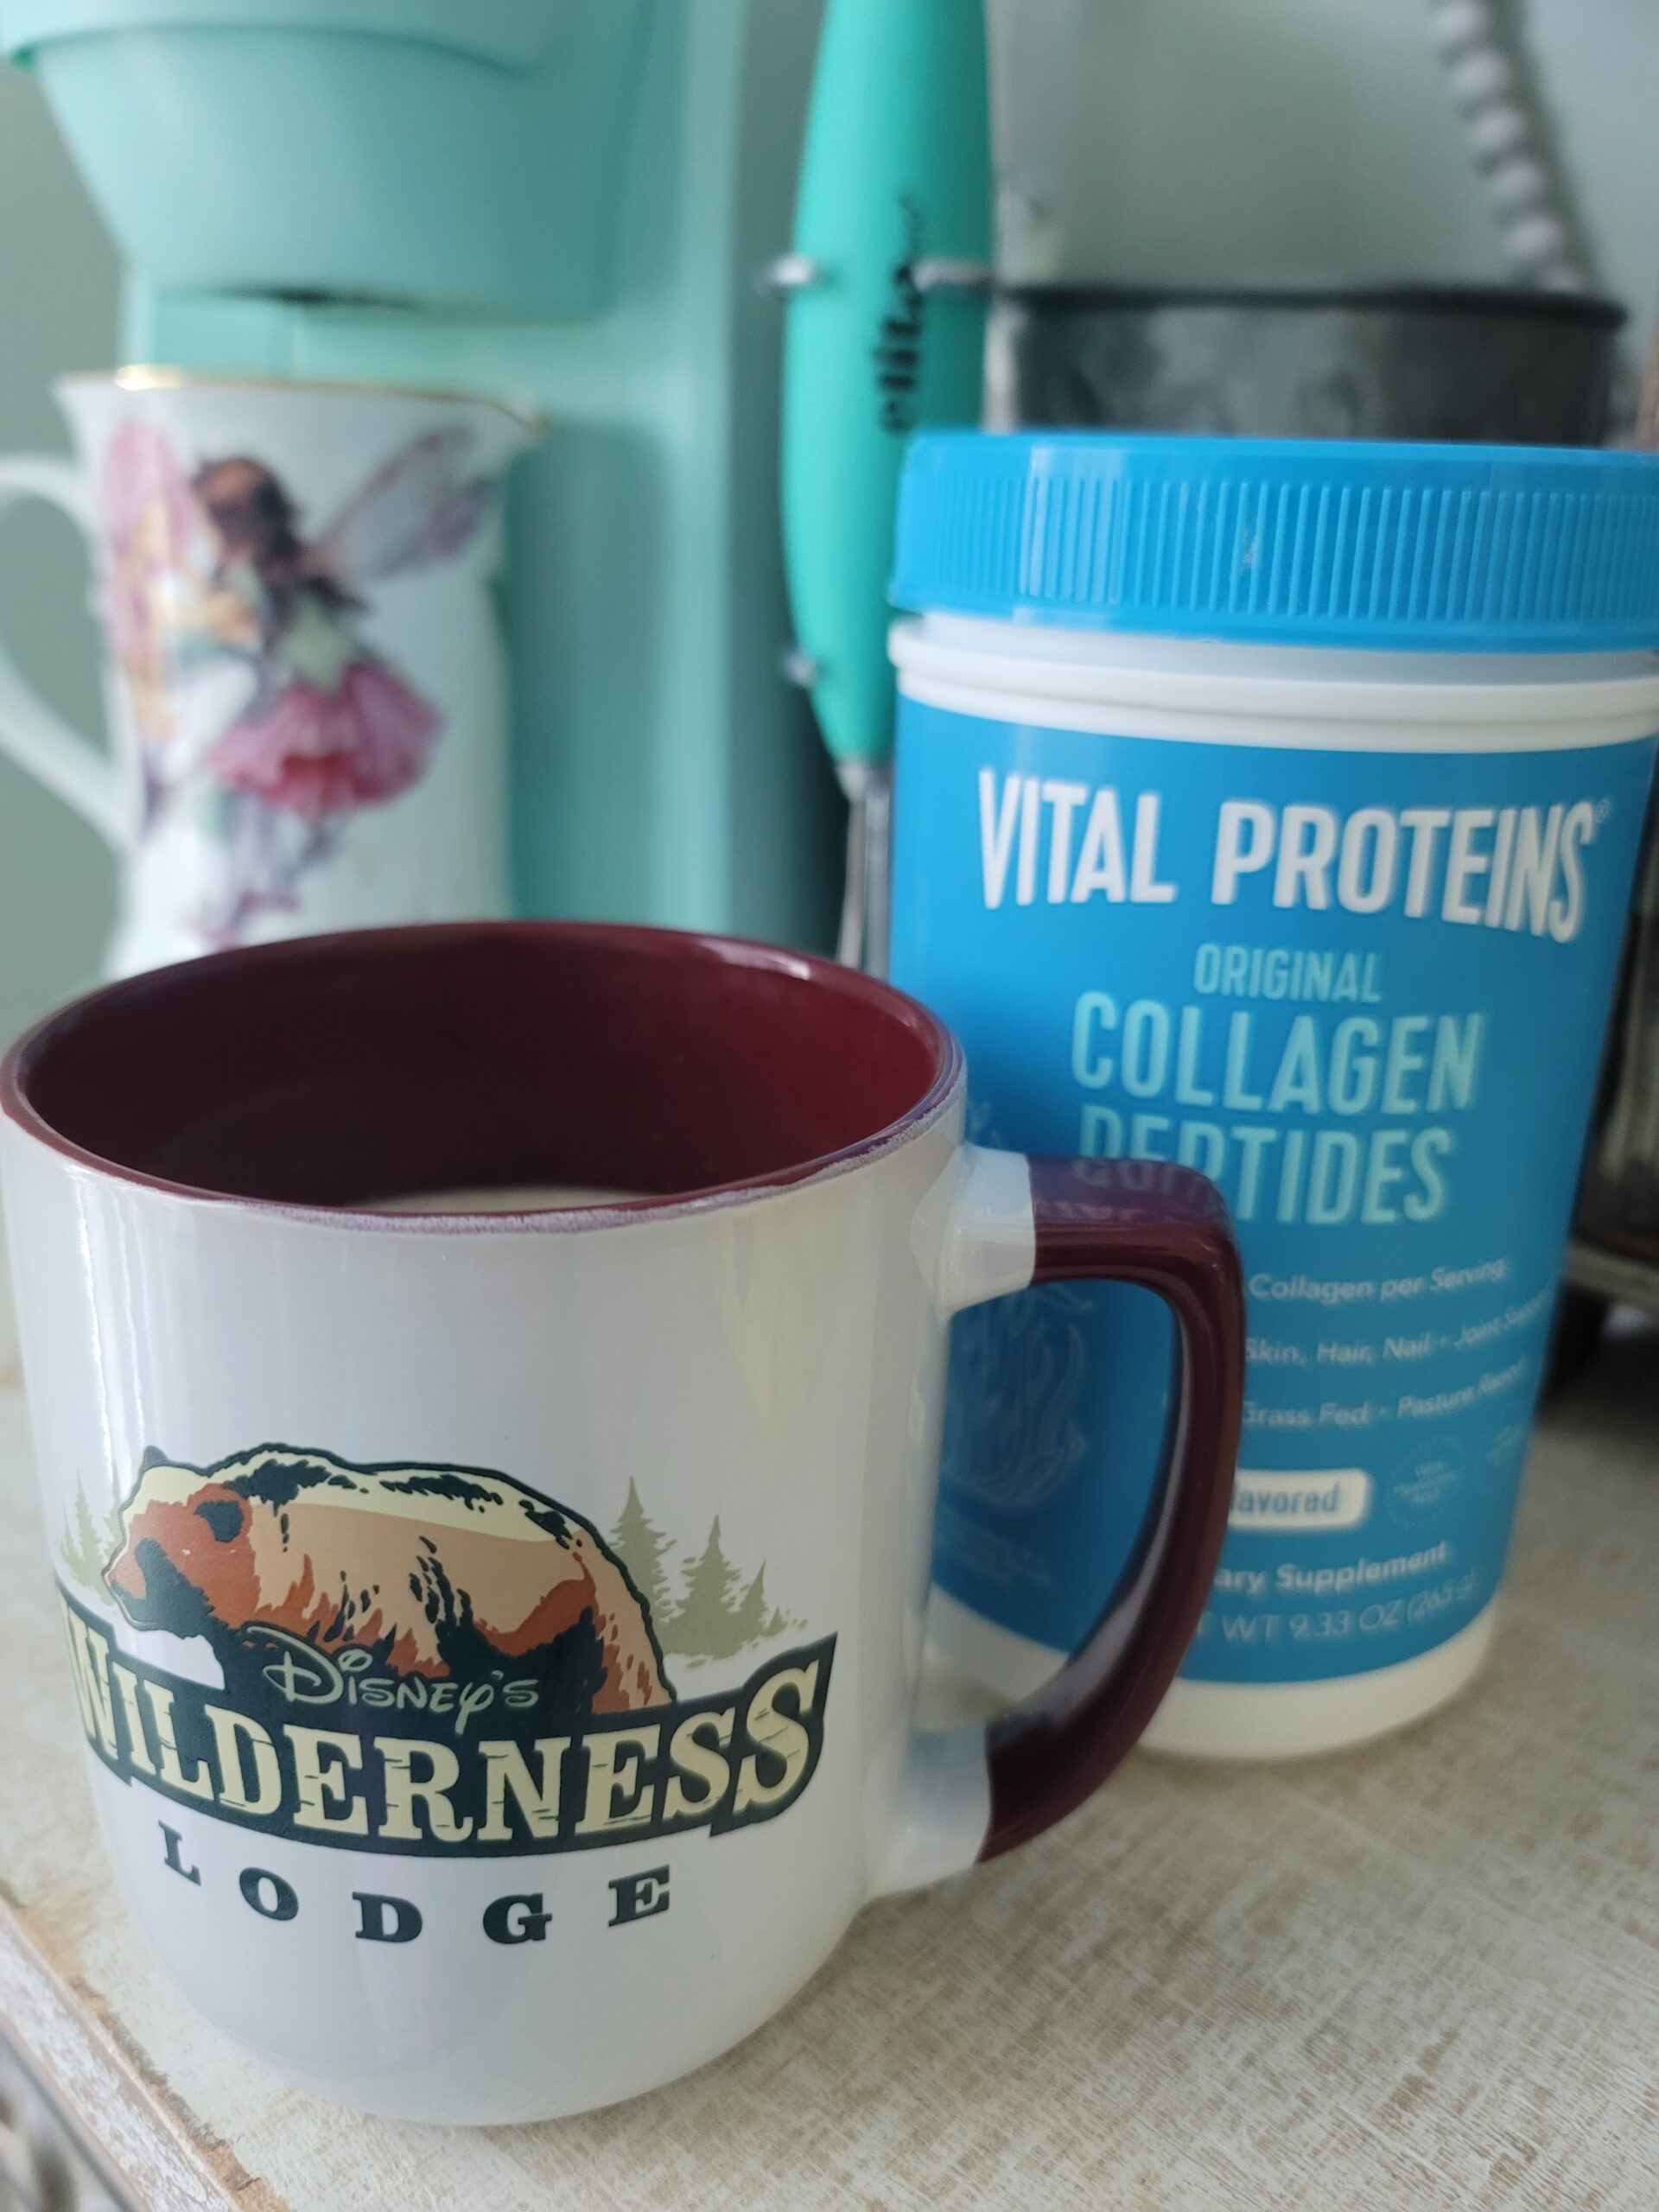 vital proteins and coffee cup